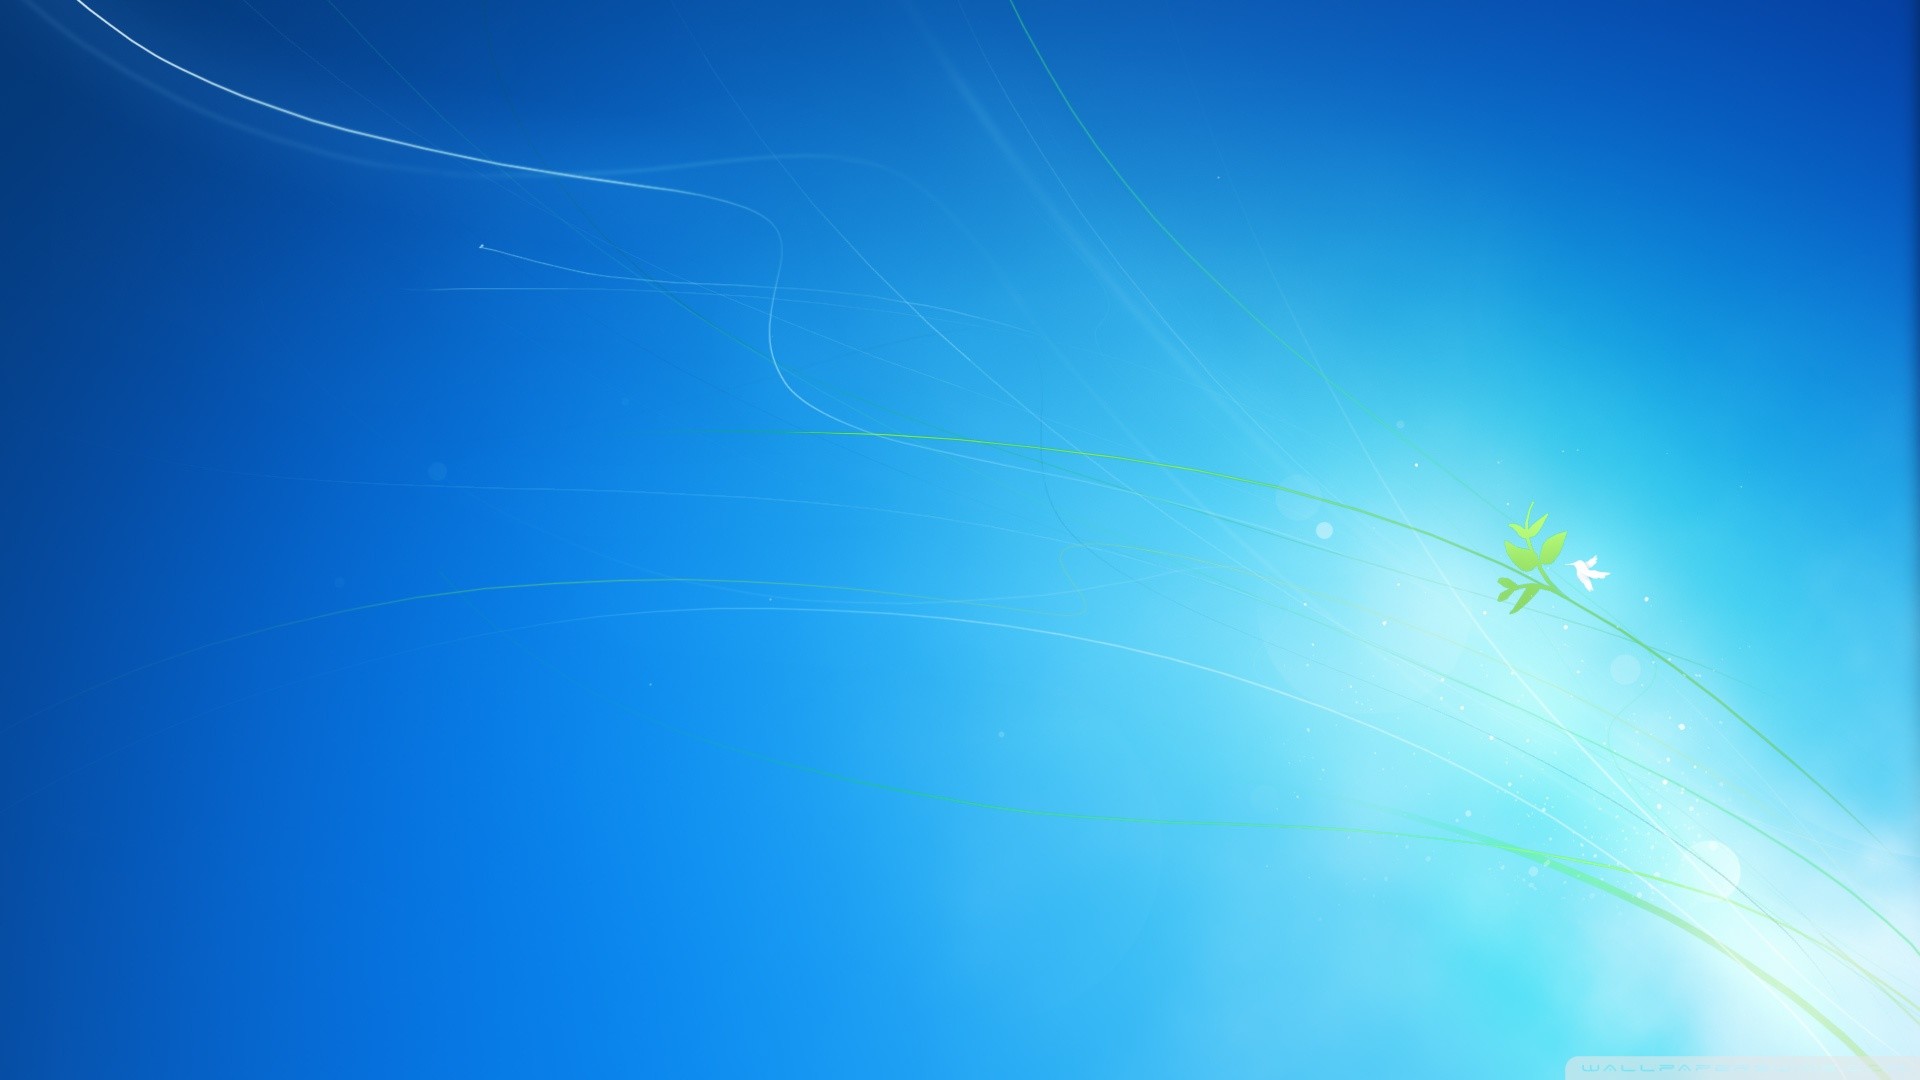 Windows 7 Background Images (64+ pictures)